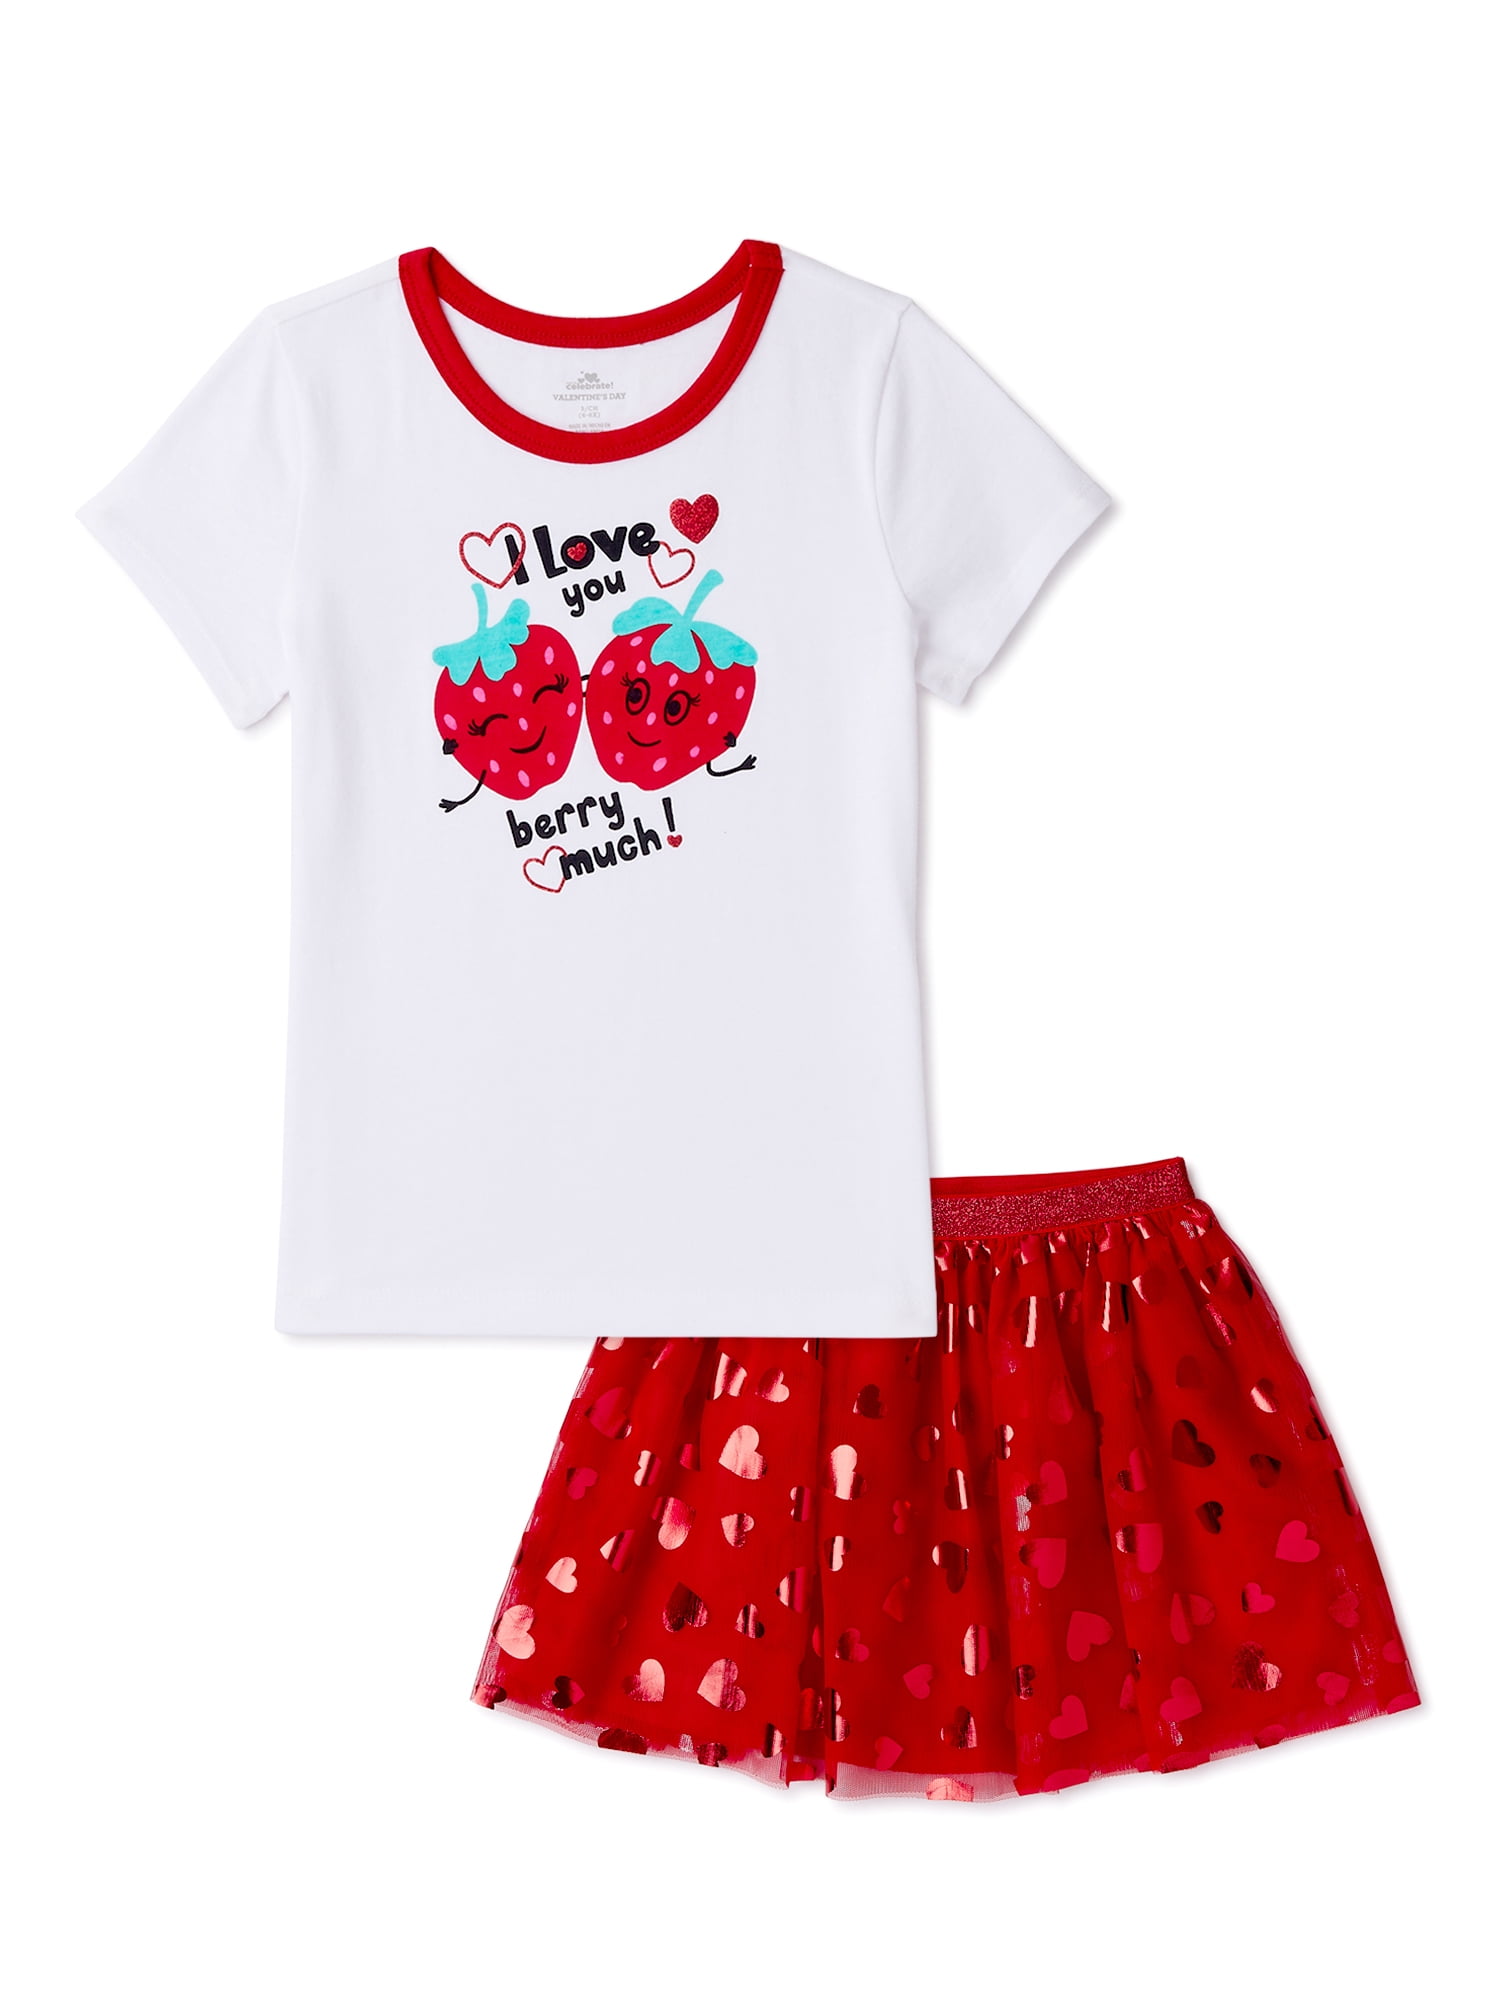 kit Anvendelse Ritual Way To Celebrate Girls Valentine's Day Graphic T-Shirt & Skirt, 2-Piece  Outfit Set, Sizes 4-18 - Walmart.com